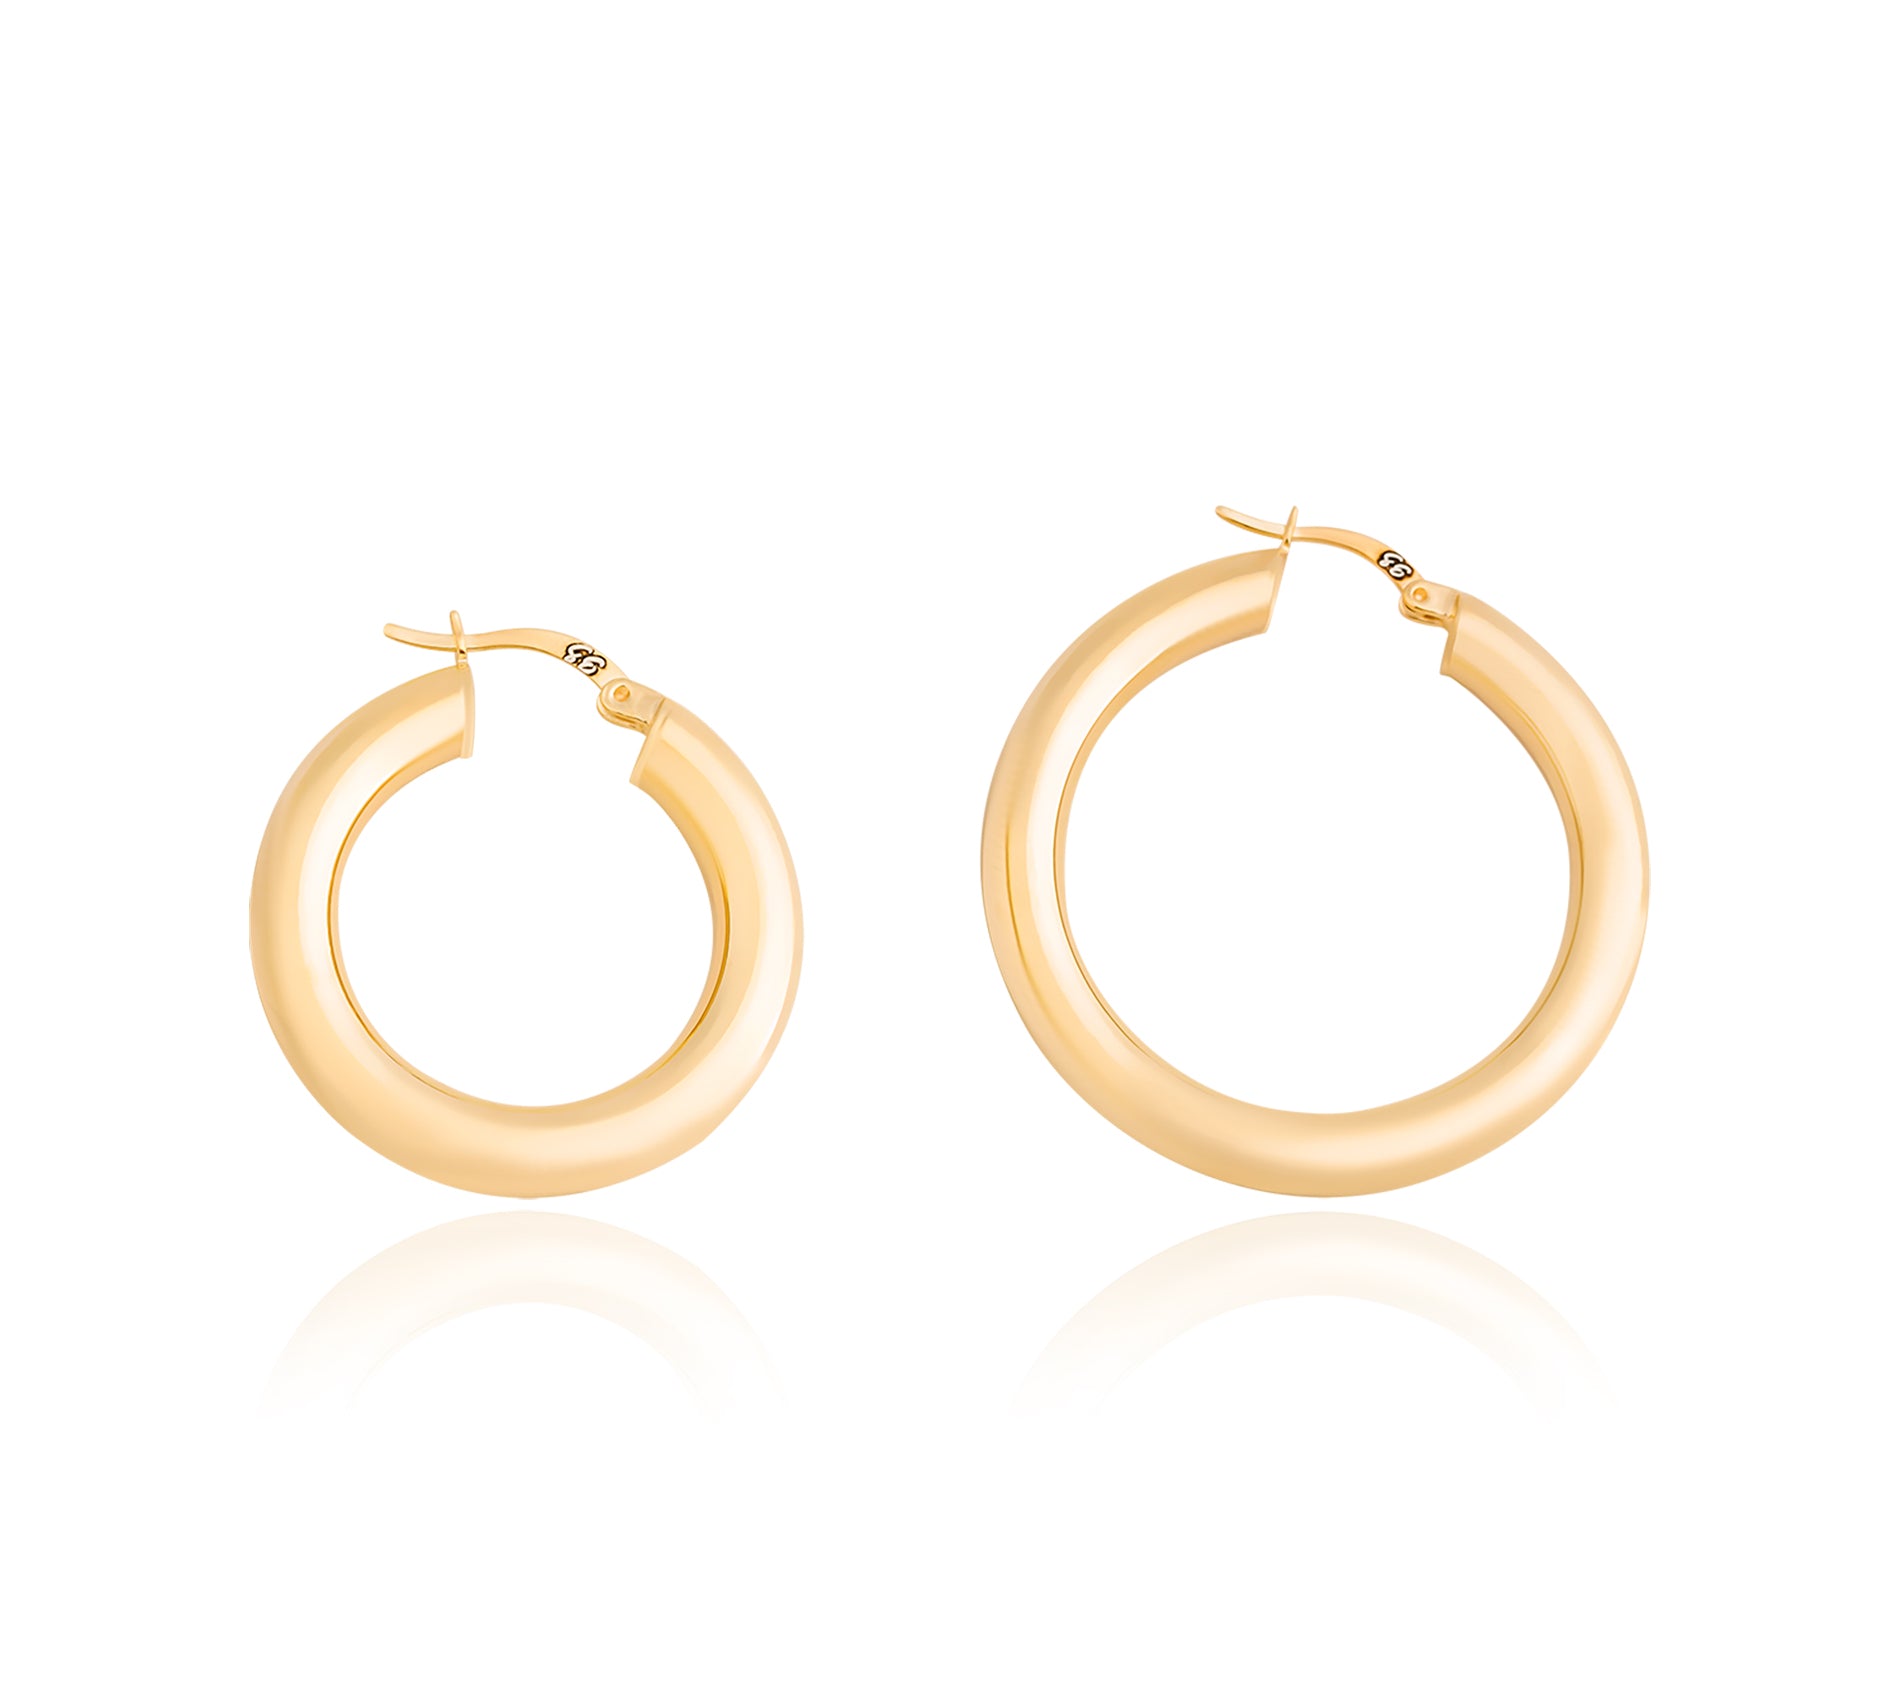 Hoops, Gold Hoop Earrings, Gold Earrings, Gold Earrings for Women, Gold Jewelry